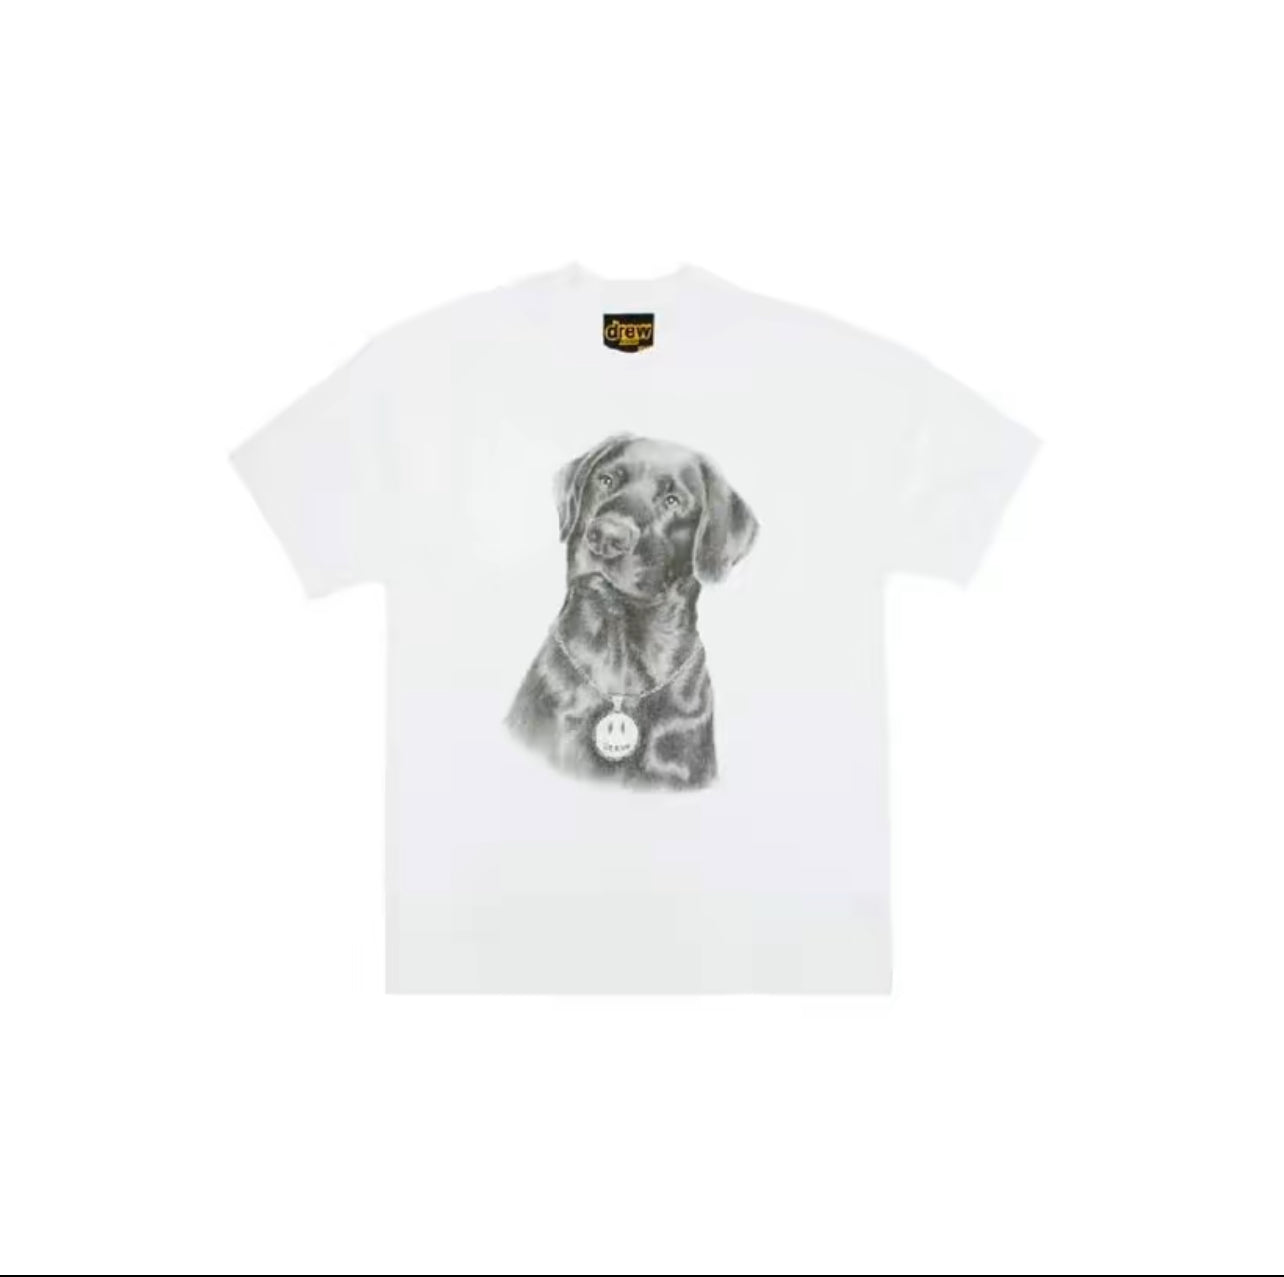 Drew House Sketch Collection Tee